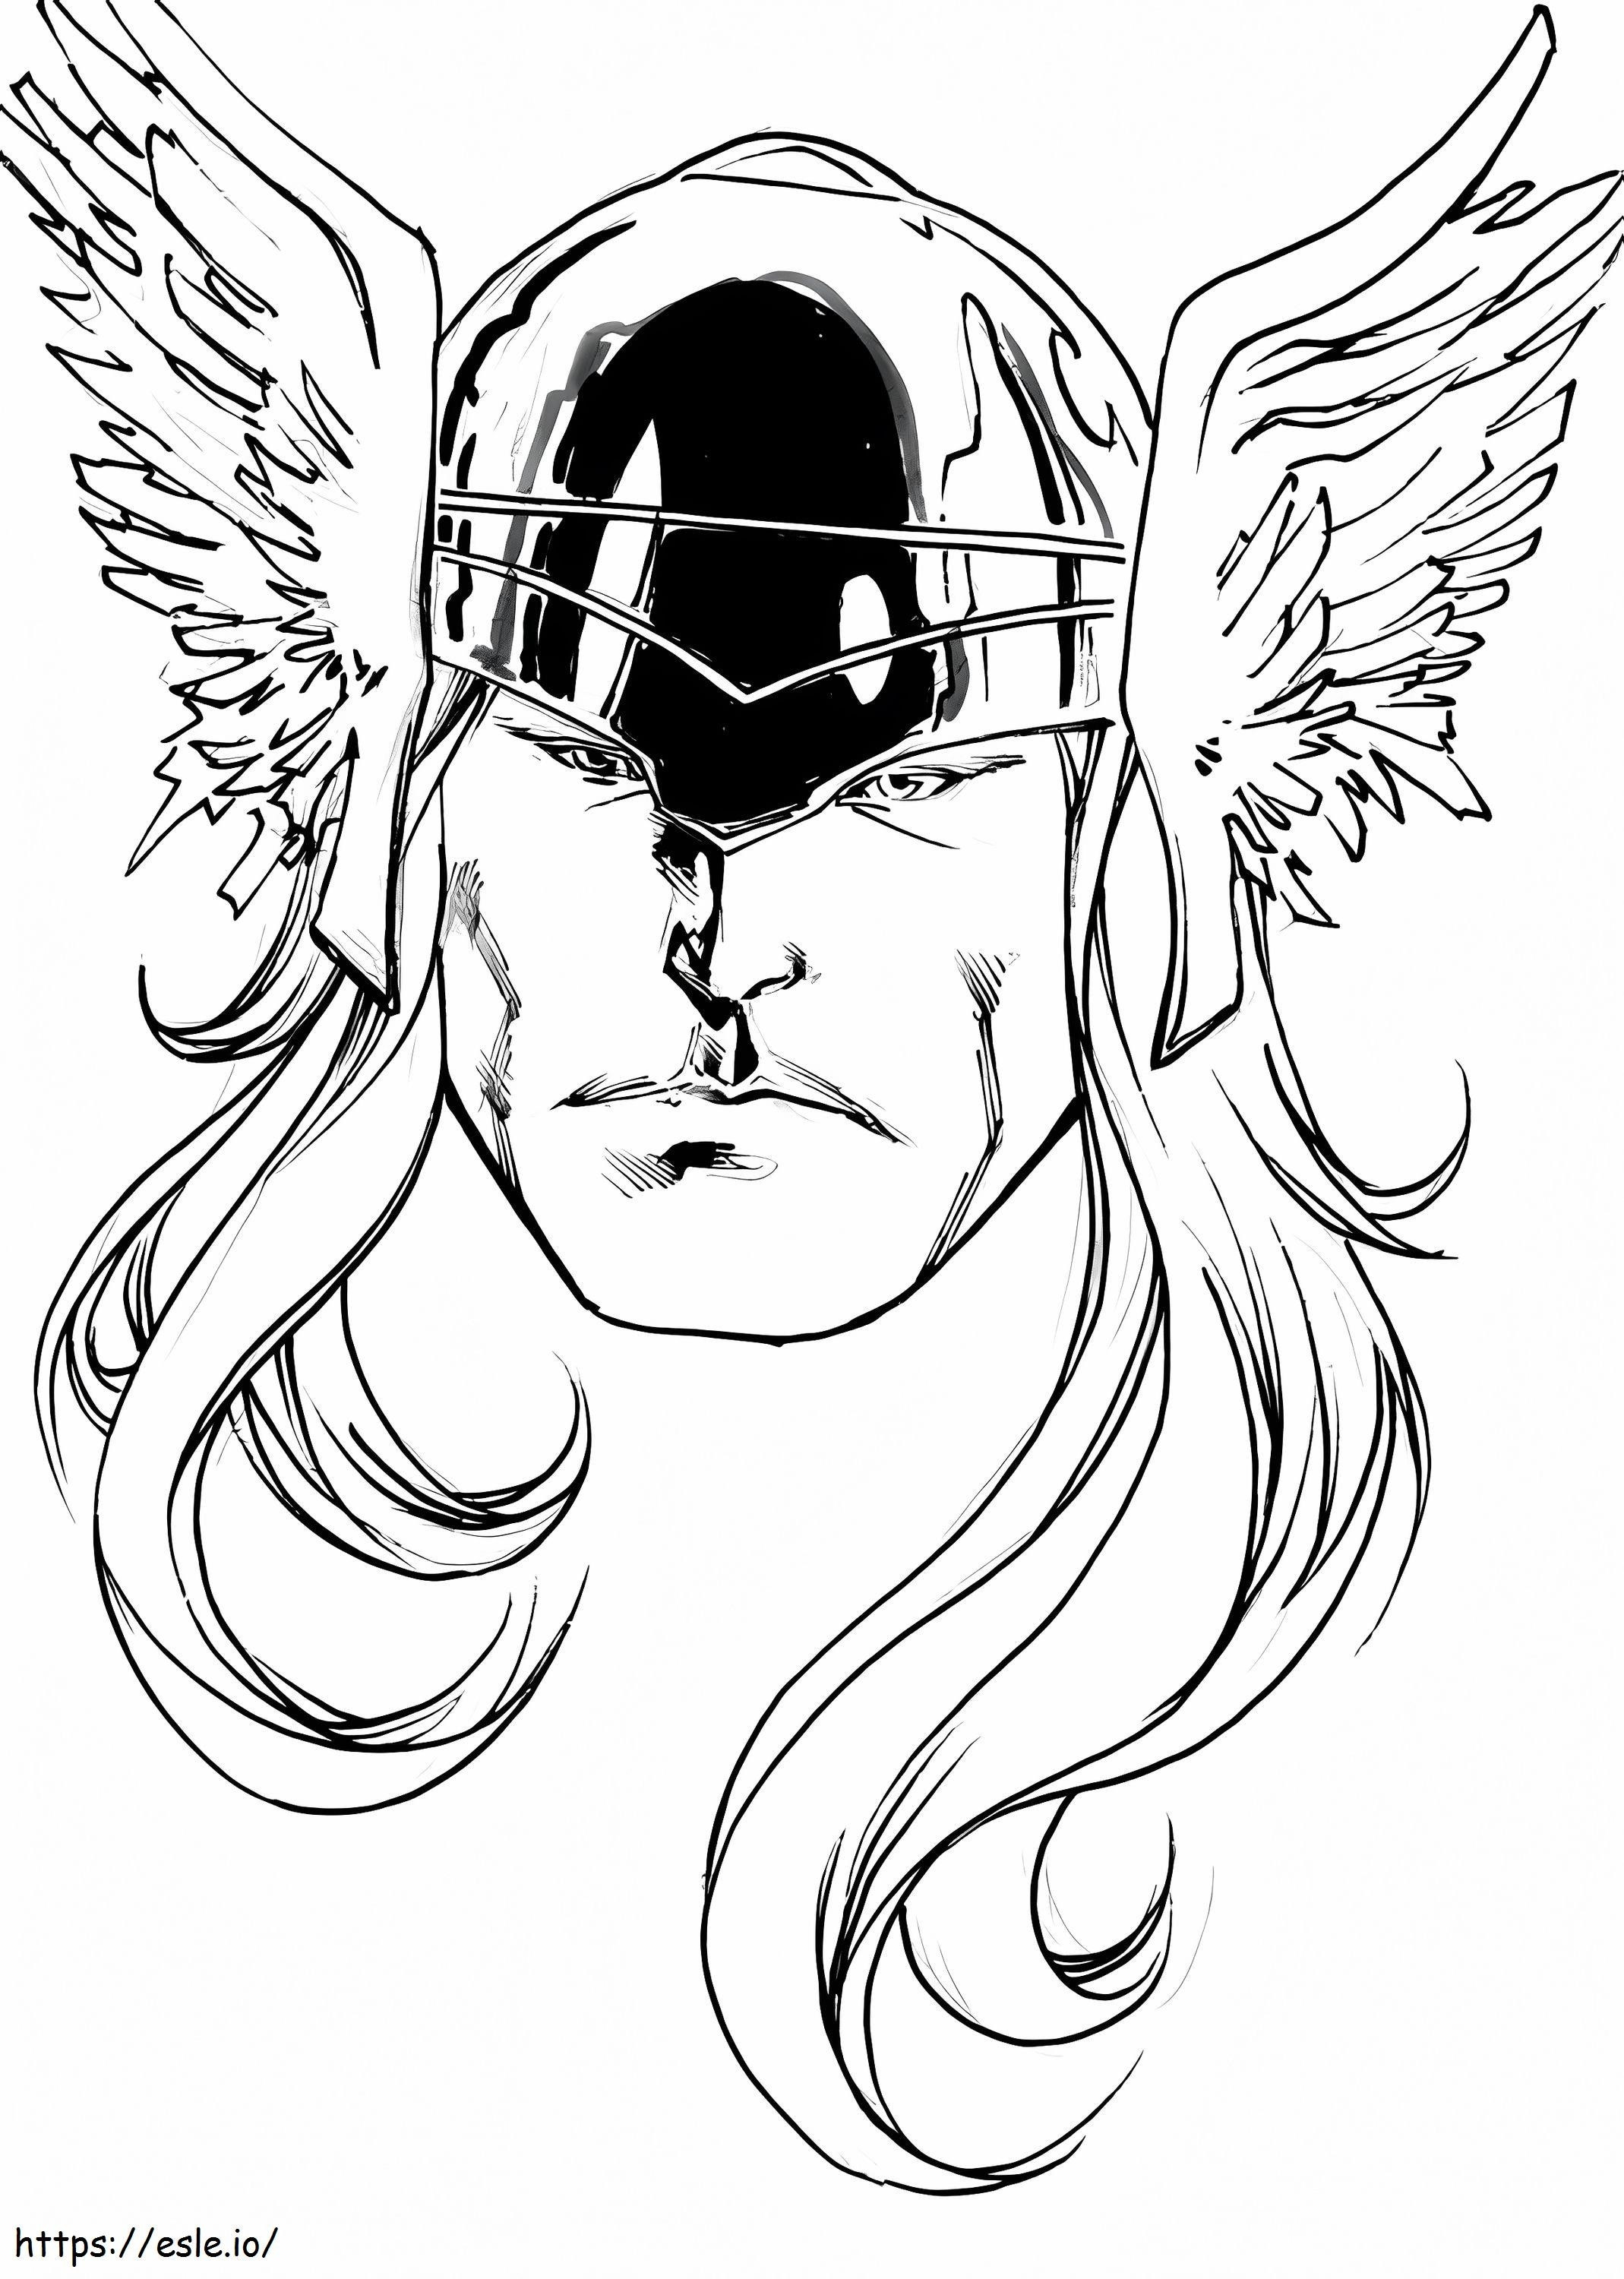 Thors Face coloring page